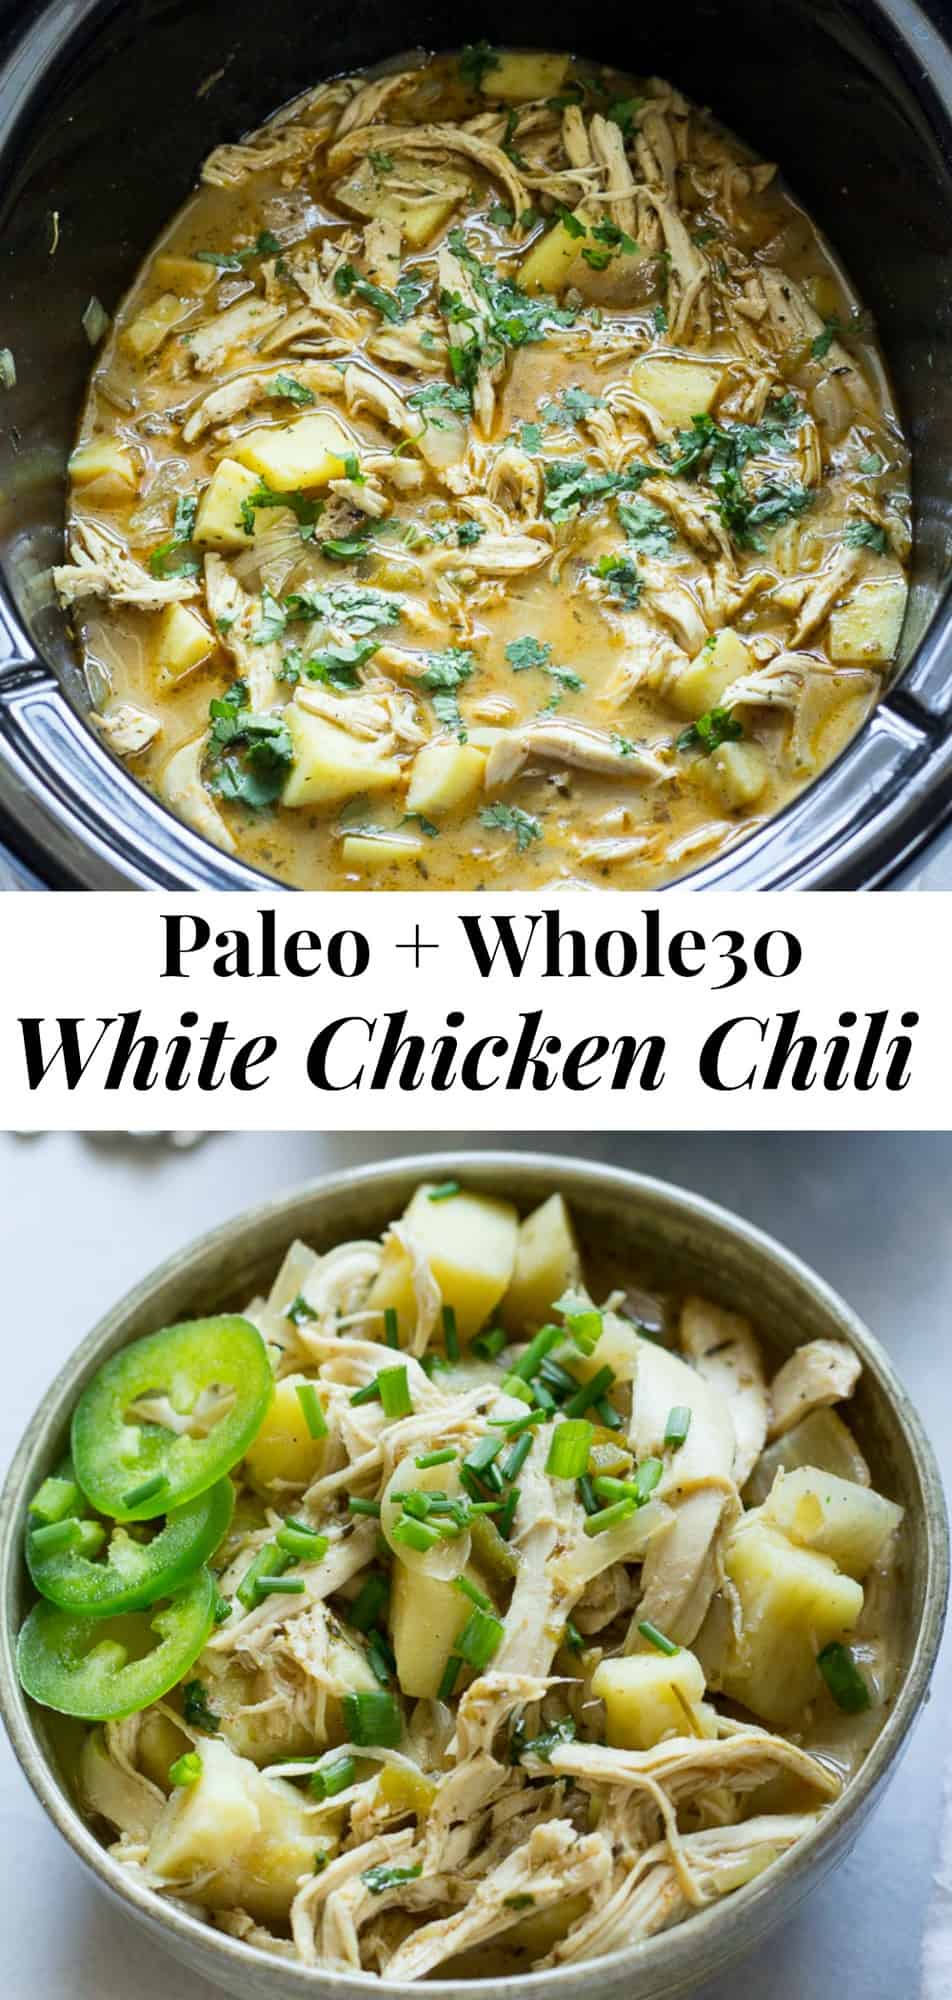 This slow cooker paleo white chicken chili with sweet potato is an easy, all in one healthy Paleo and Whole30 meal for any night of the week!  Great to makes ahead and pack for lunches too.  Kid approved, gluten free, dairy free and a blog favorite. #paleo #cleaneating #whole30